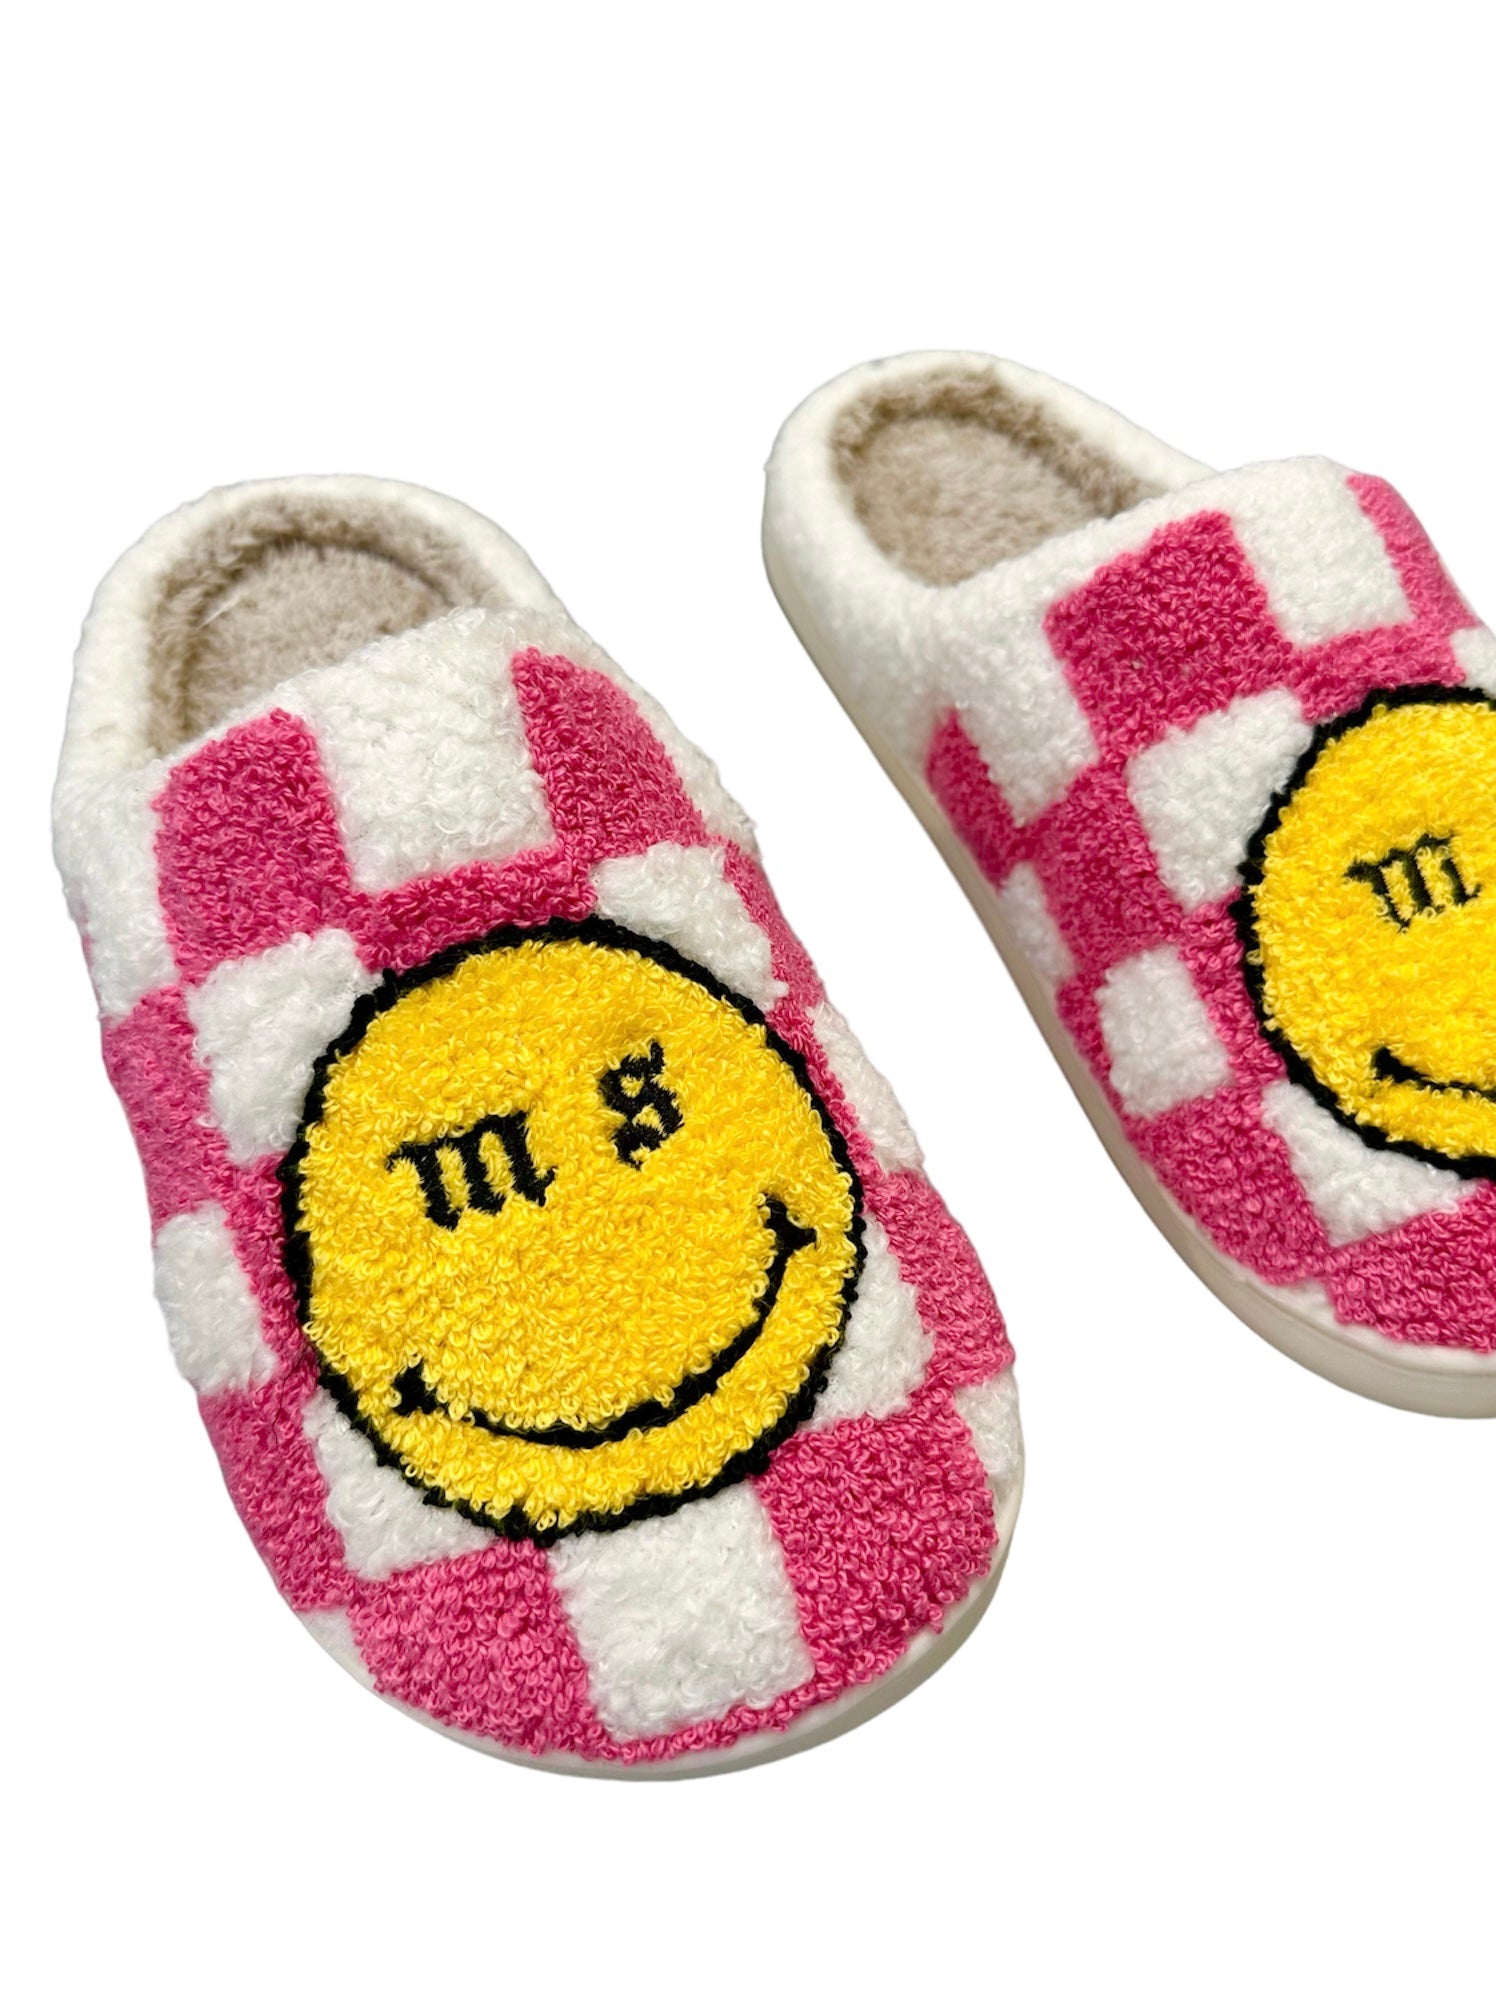 Pink Check Smiley slippers.